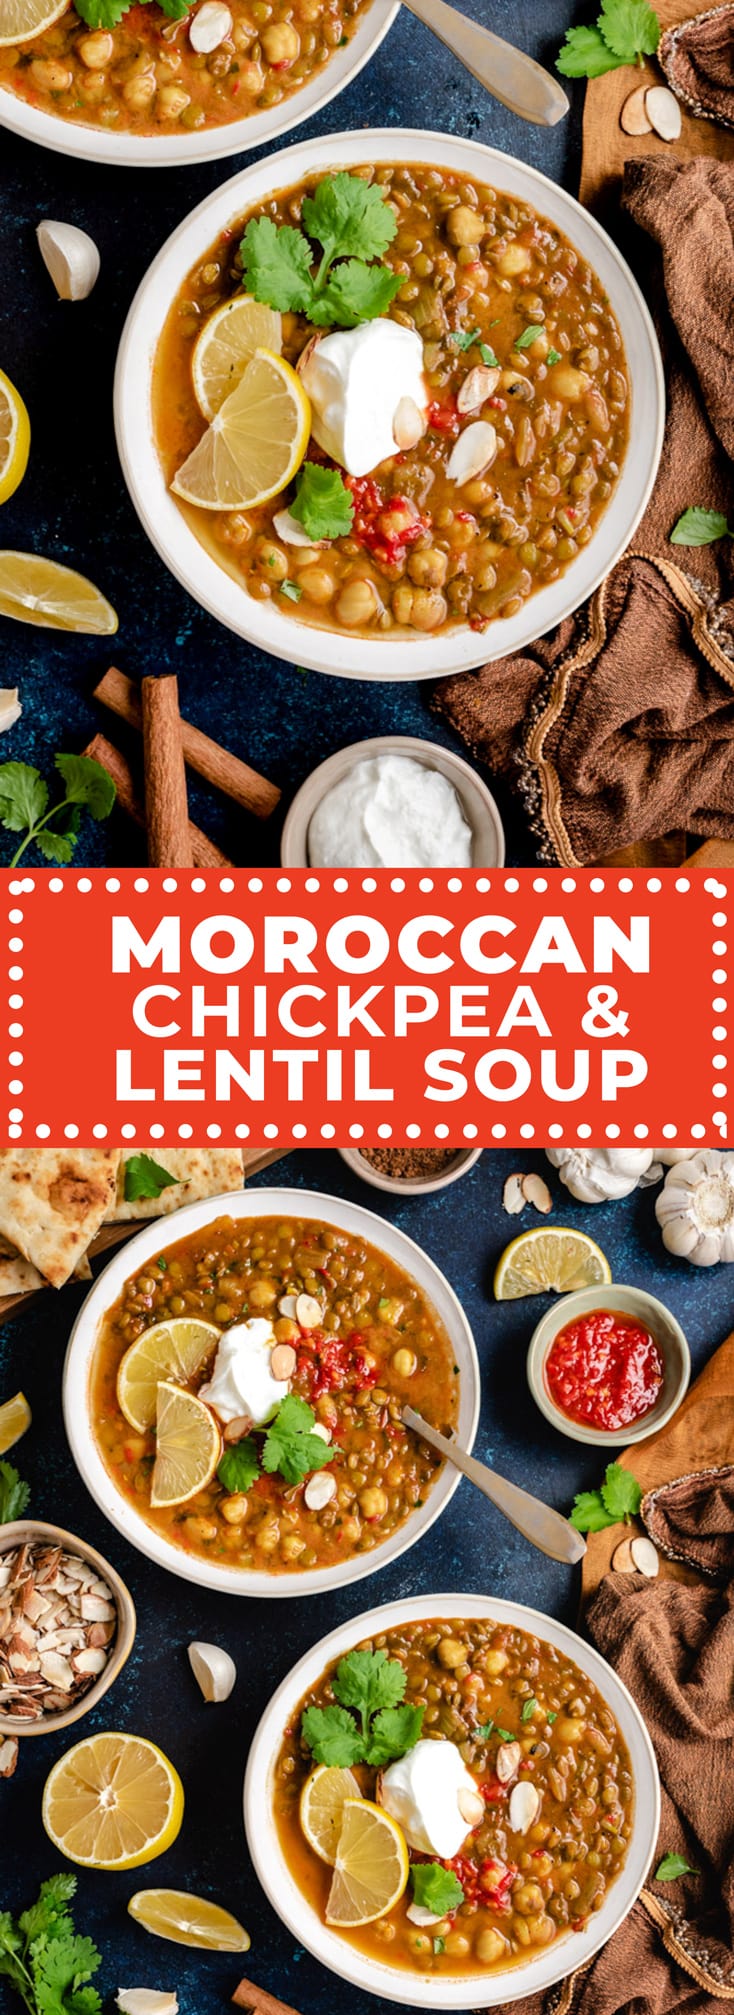 a is a comforting Moroccan soup that features chickpeas, lentils, and plenty of deep flavors from harissa paste and toasted spices. Typically, Harira soup includes ground meat, but this easy version is vegetarian (and vegan) friendly! Even better-- it mostly makes use of pantry staples, so it’s easy to stock up ahead of time and make this delicious soup whenever the craving hits. | hostthetoast.com